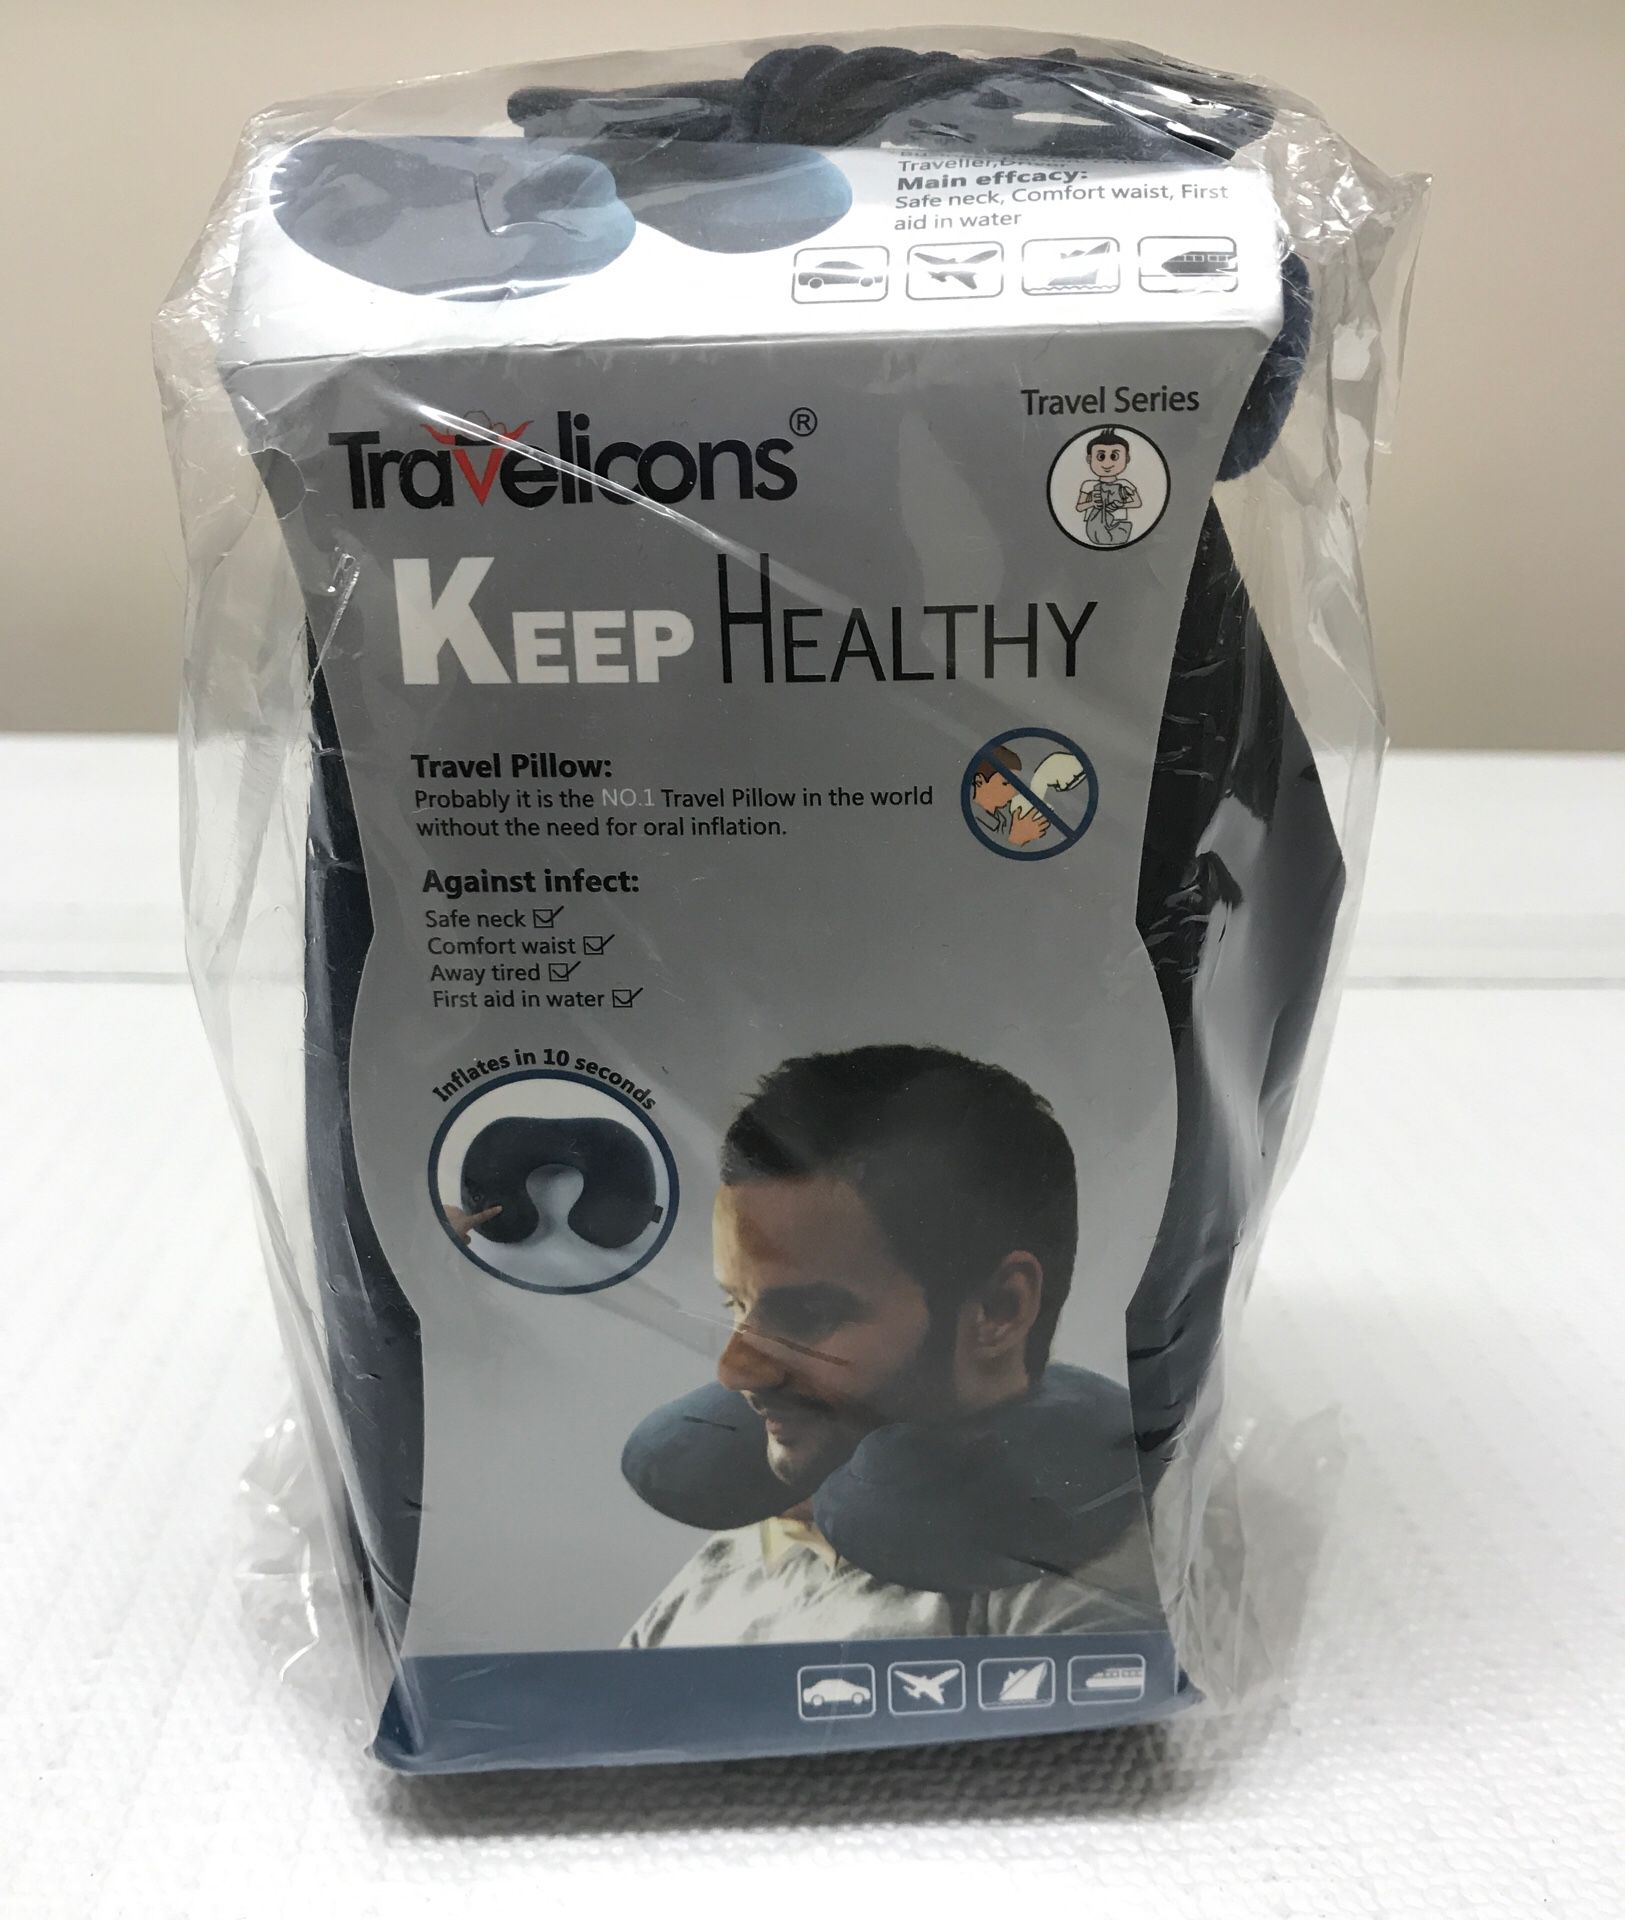 New Travelicons Self-Inflatable Travel Neck Pillow With Travel Pouch Inflates in 10 Seconds